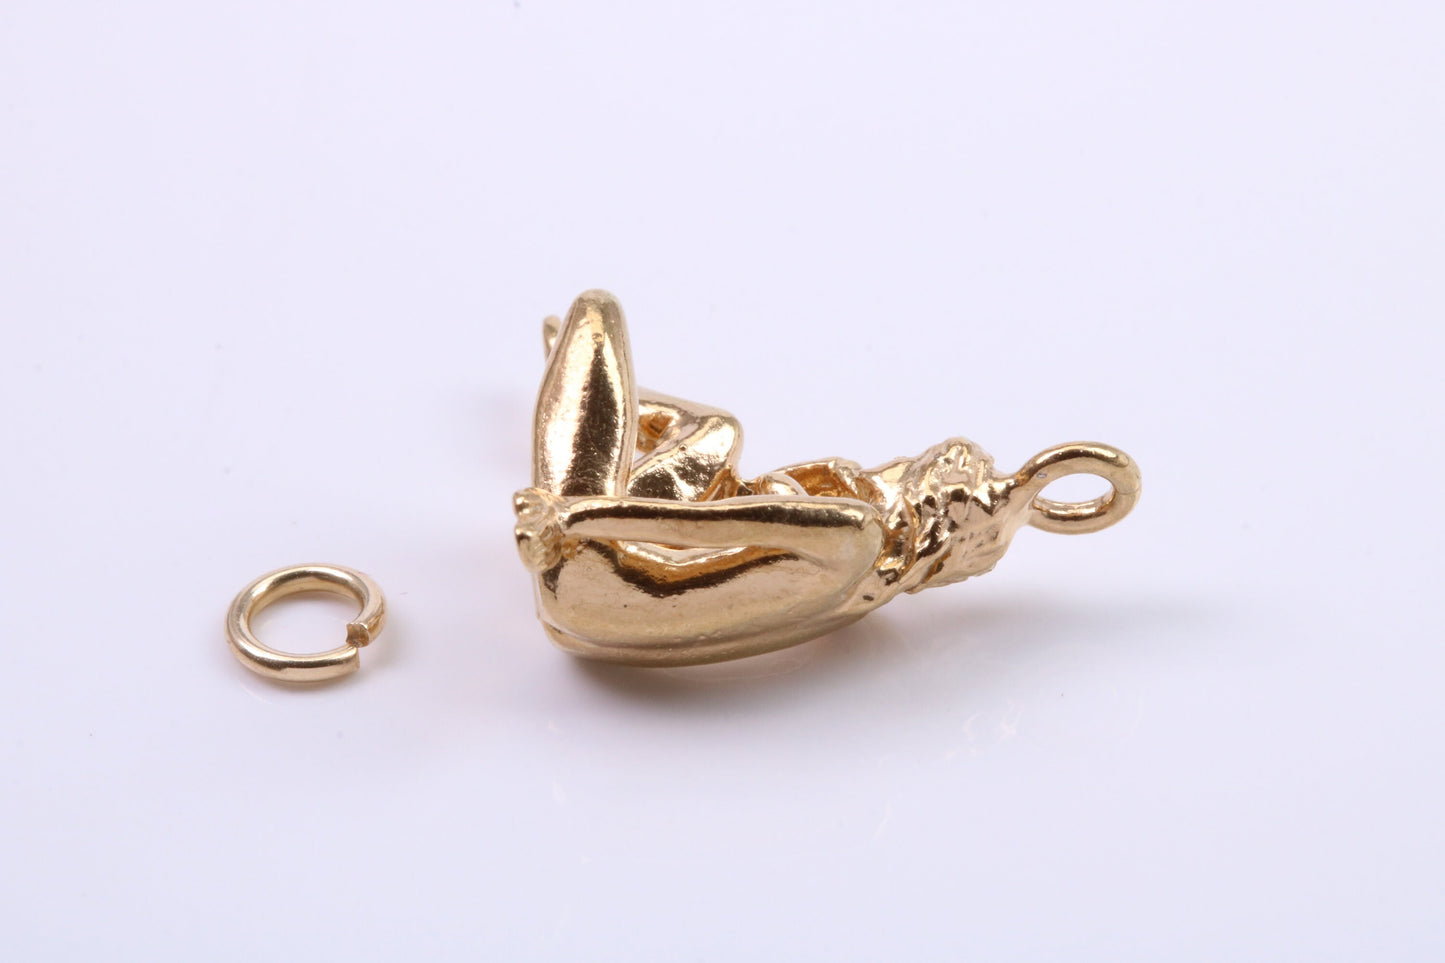 Virgo Zodiac Sign Charm, Traditional Charm, Made from Solid 9ct Yellow Gold, British Hallmarked, Complete with Attachment Link